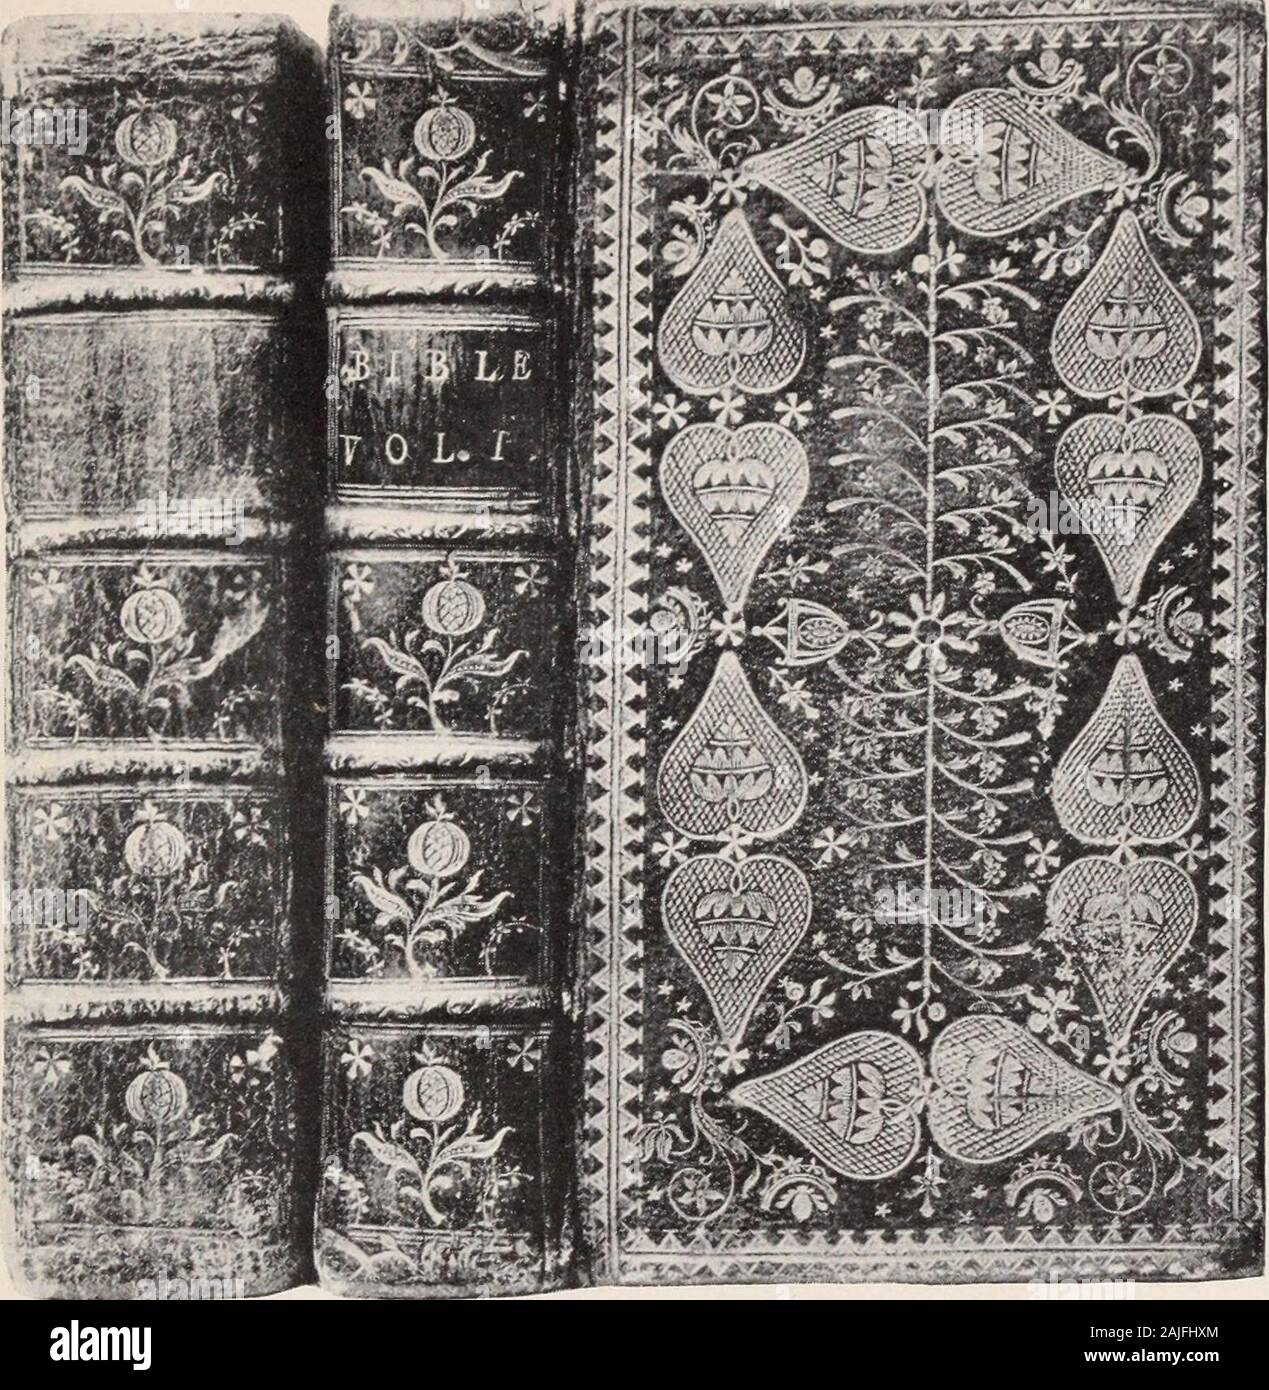 John Taylor : a Scottish merchant of Glasgow and New York, 1752-1833 A family narrative written for his descendants . esthe text of the Bible it contains The PSALMS ofDAVID in Metre as then sung in the churches. Thedark leather binding is covered with fine gold toolingin a quaint old pattern, and on the inside of each frontcover is a slip of red morocco on which in gold letters we see MARGARET • SCOTTOctober • 27 • 1782 I wish we could know whose loving hand gave herthis precious token. Probably her father or mother. The only mementoes of Margaret Scott which havedescended to us—her portrait, Stock Photo